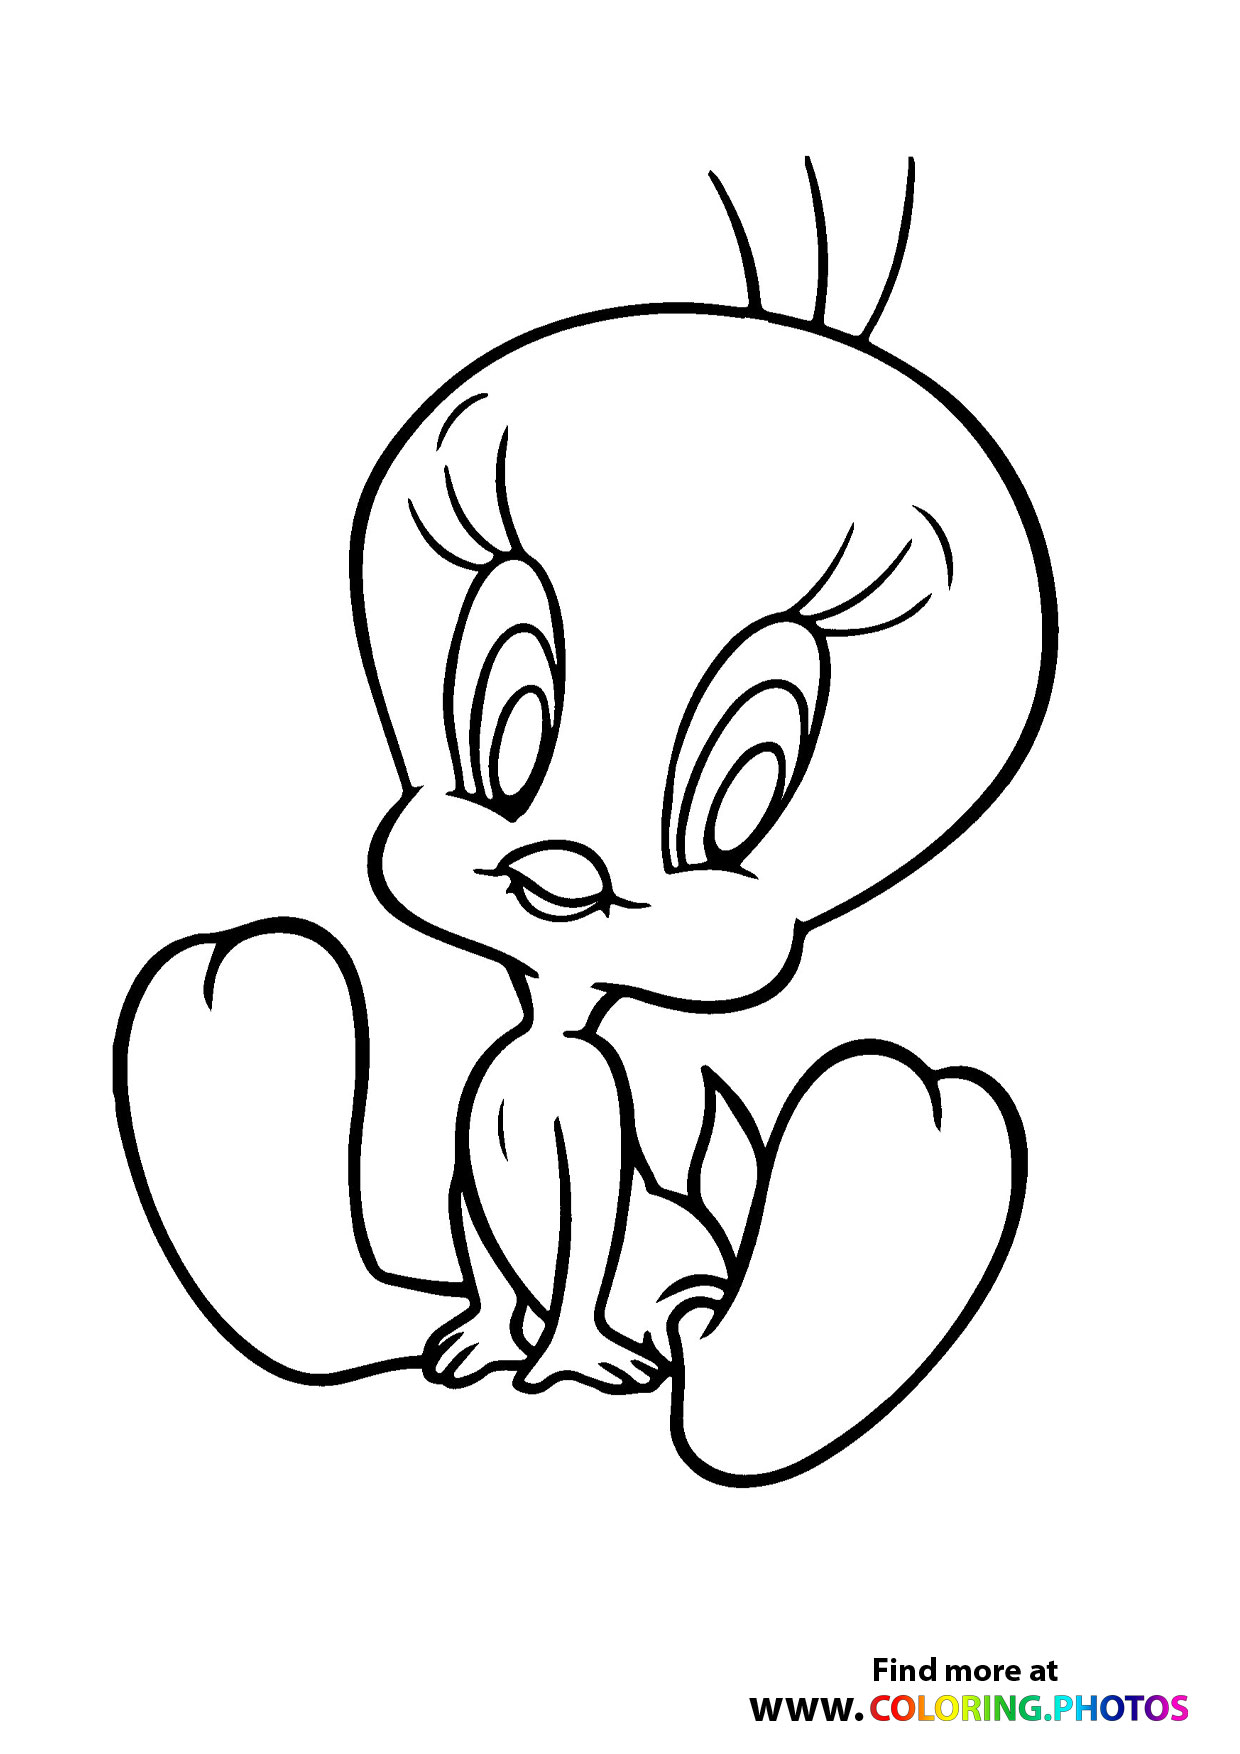 Tweety bird   Coloring Pages for kids